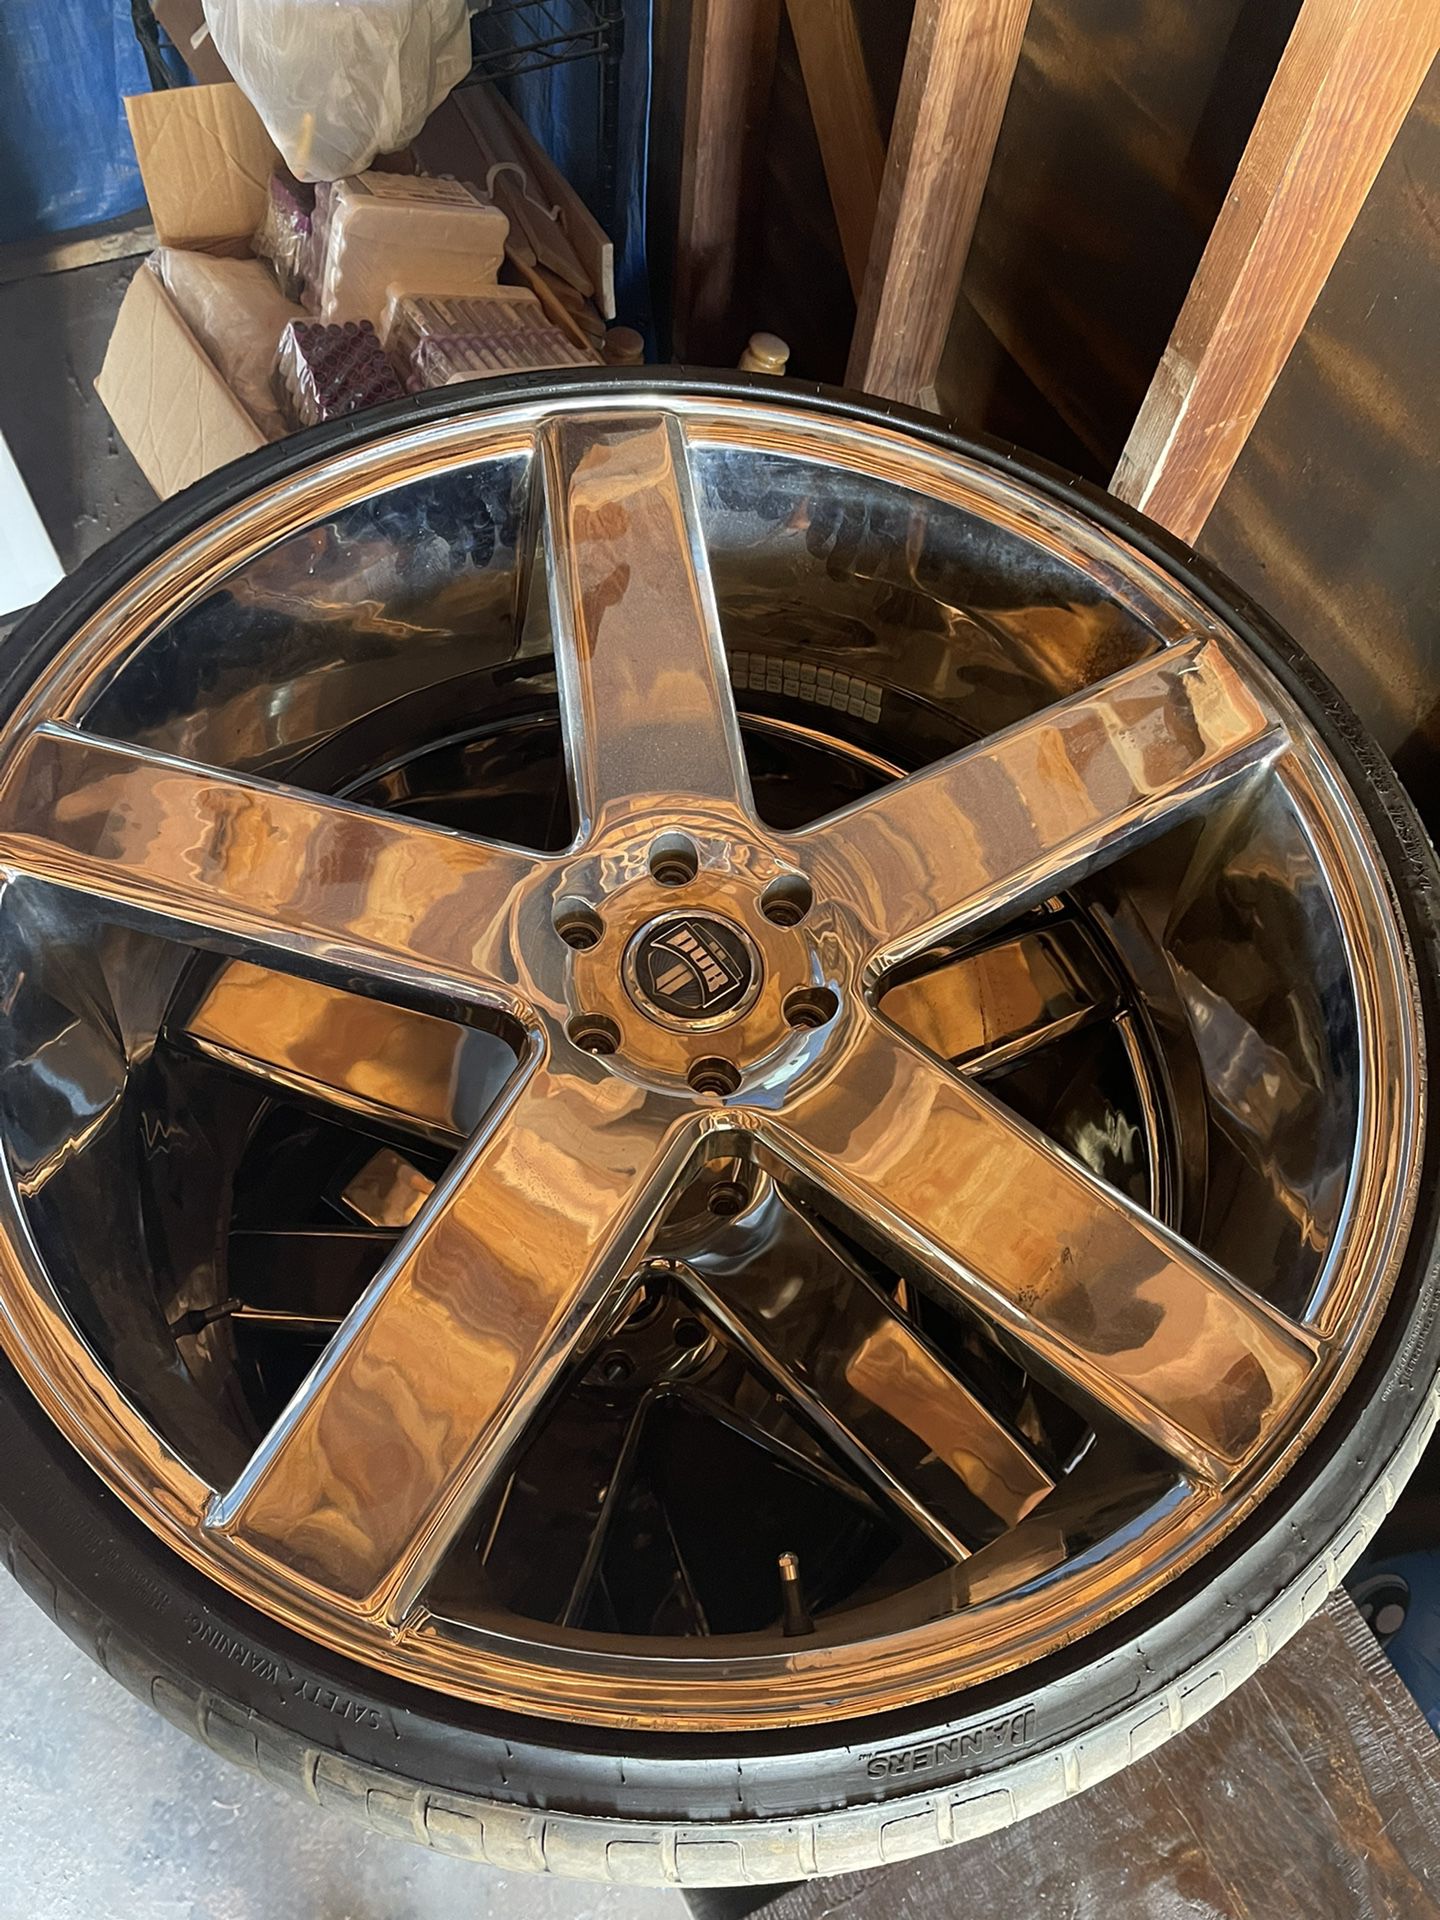 28” Rims & Brand New Tires (Will Work Out Financial Options If Needed)